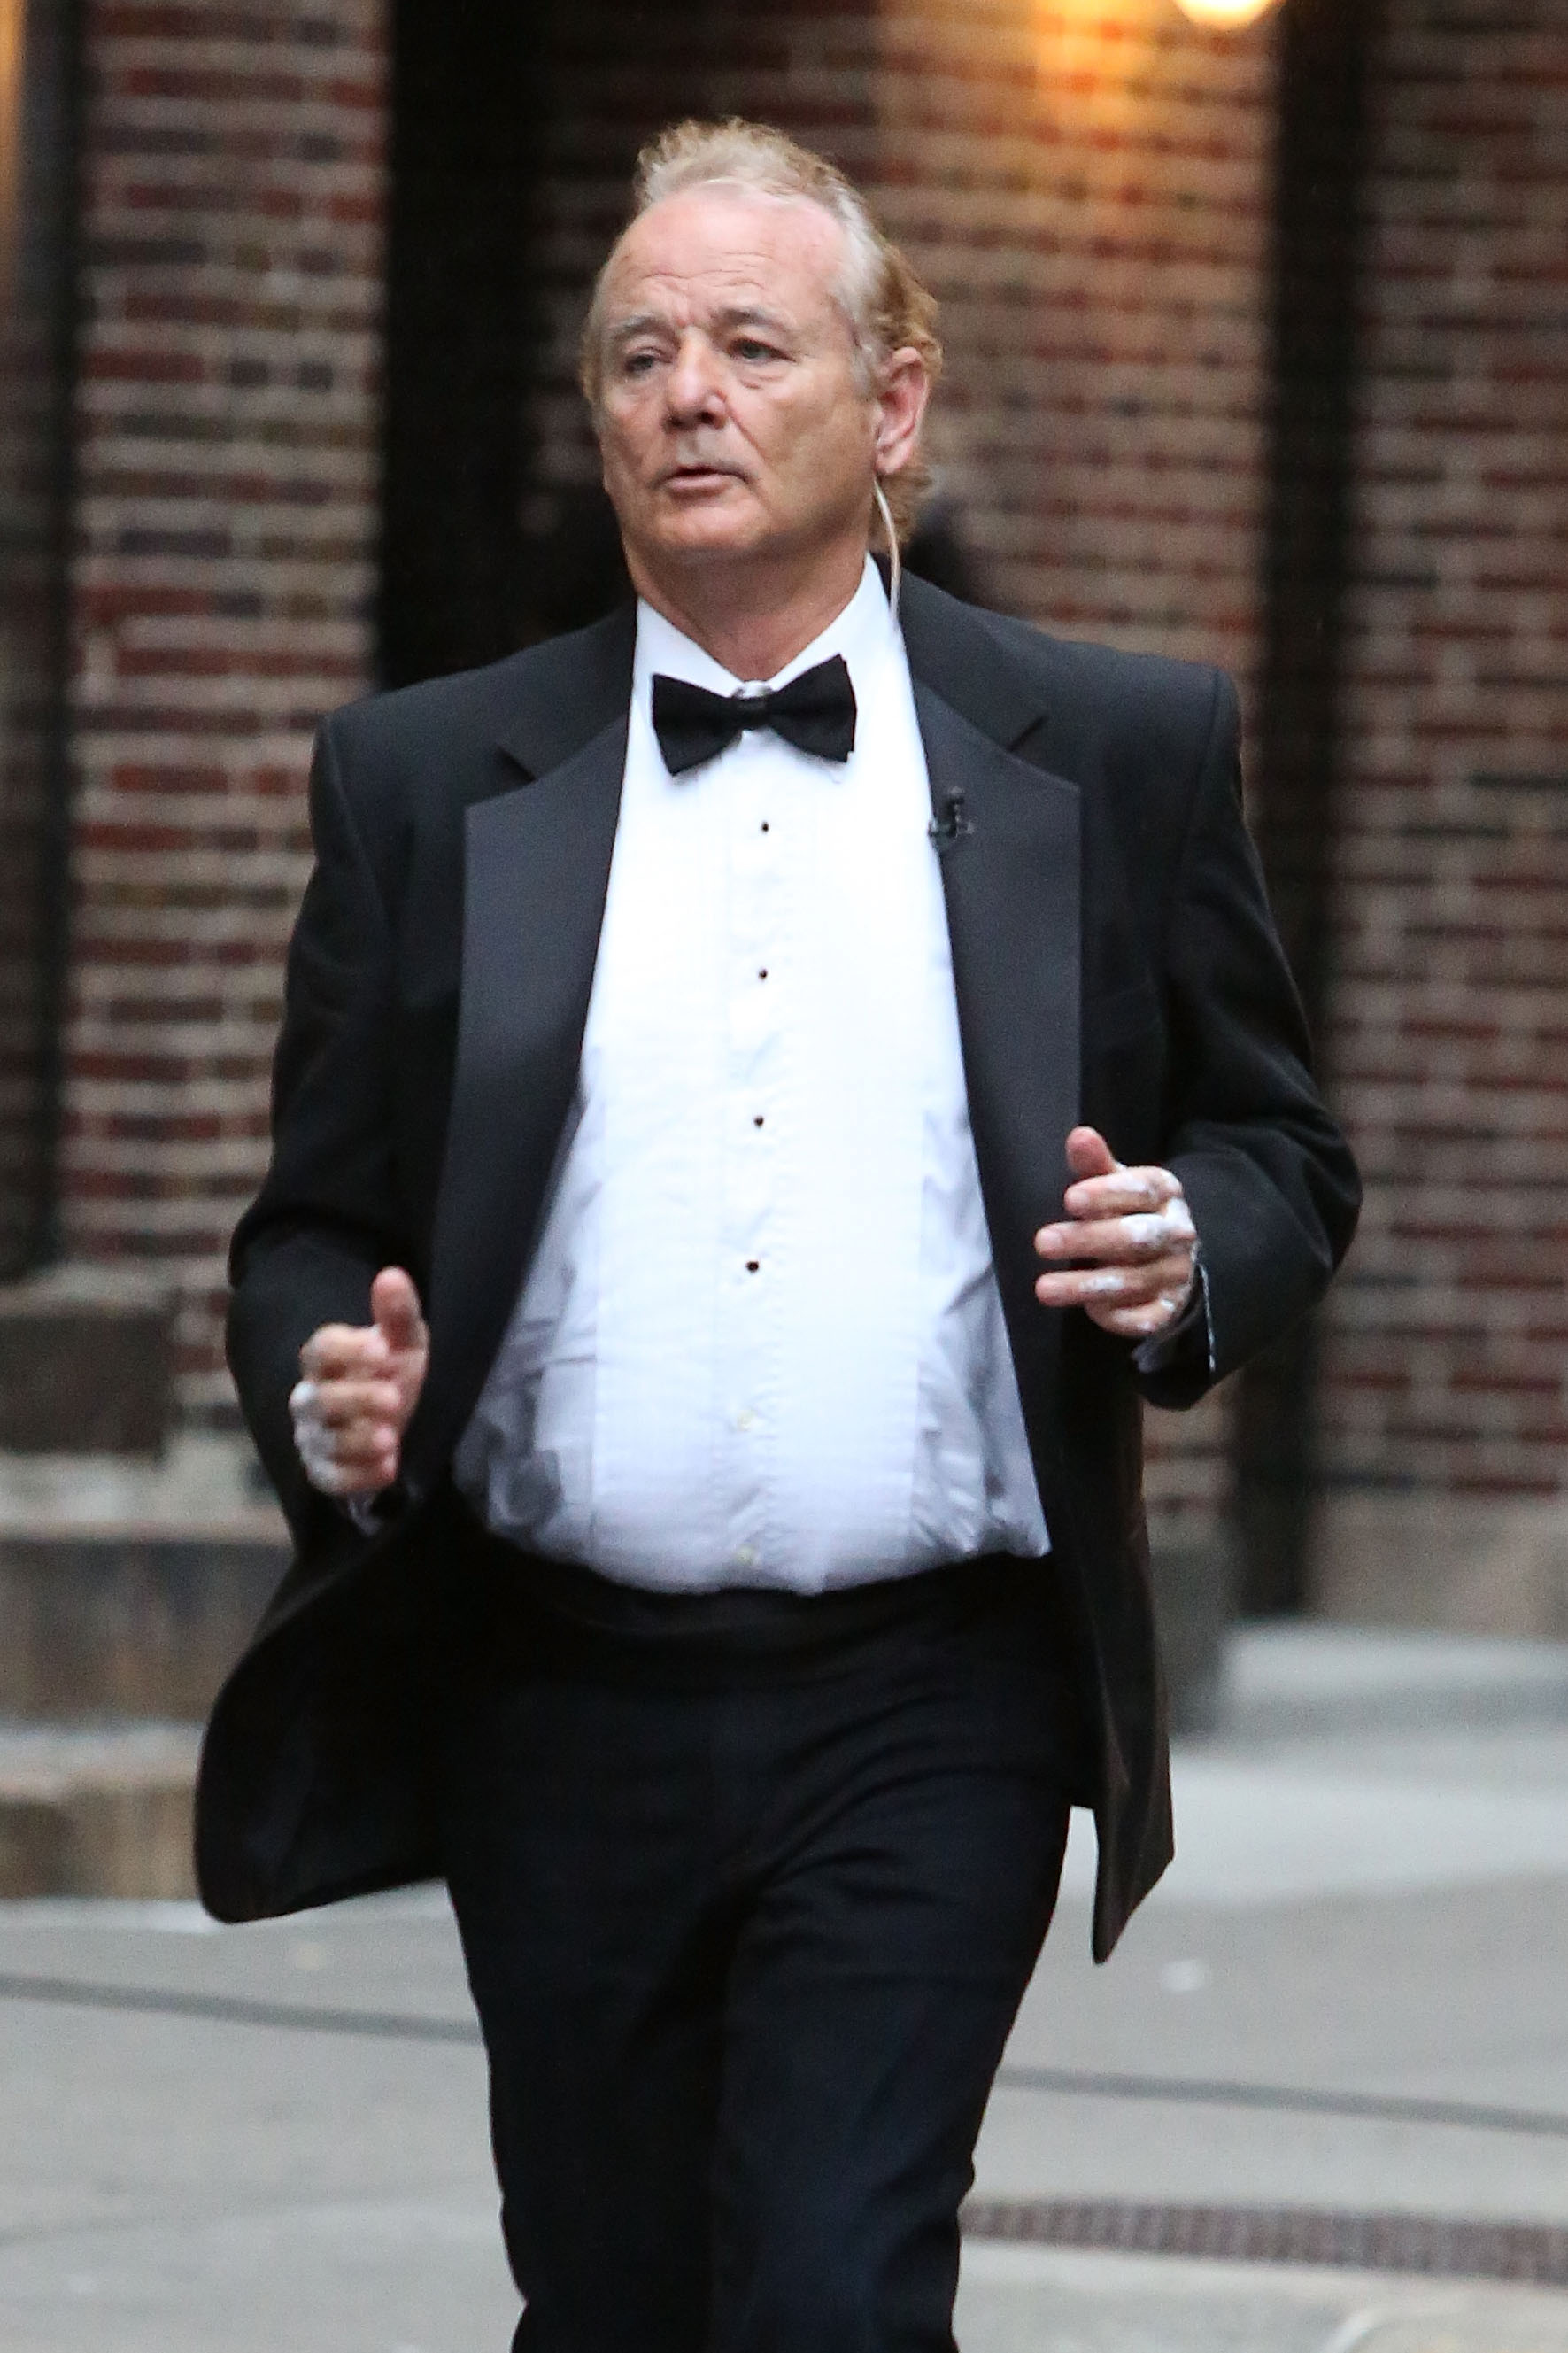 Actor Bill Murray goes jogging in black tie outside of "Late Show with David Letterman" on October 15, 2014 in New York City.